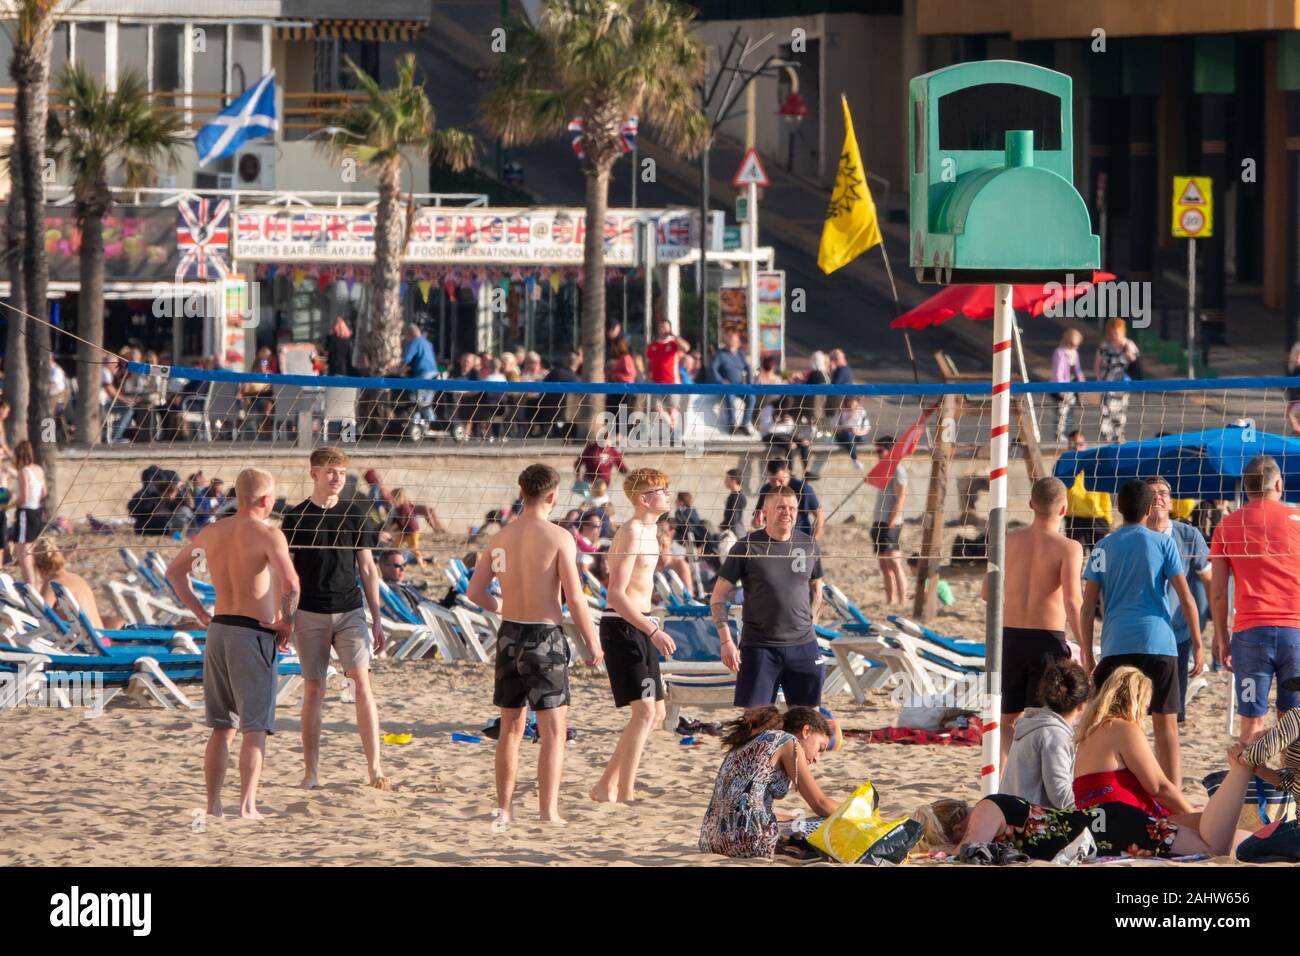 Benidorm, Alicante Province, Spain. 1st January 2020. Tourists and locals enjoy the warm, sunny weather on Levante beach on New Years Day. Stock Photo